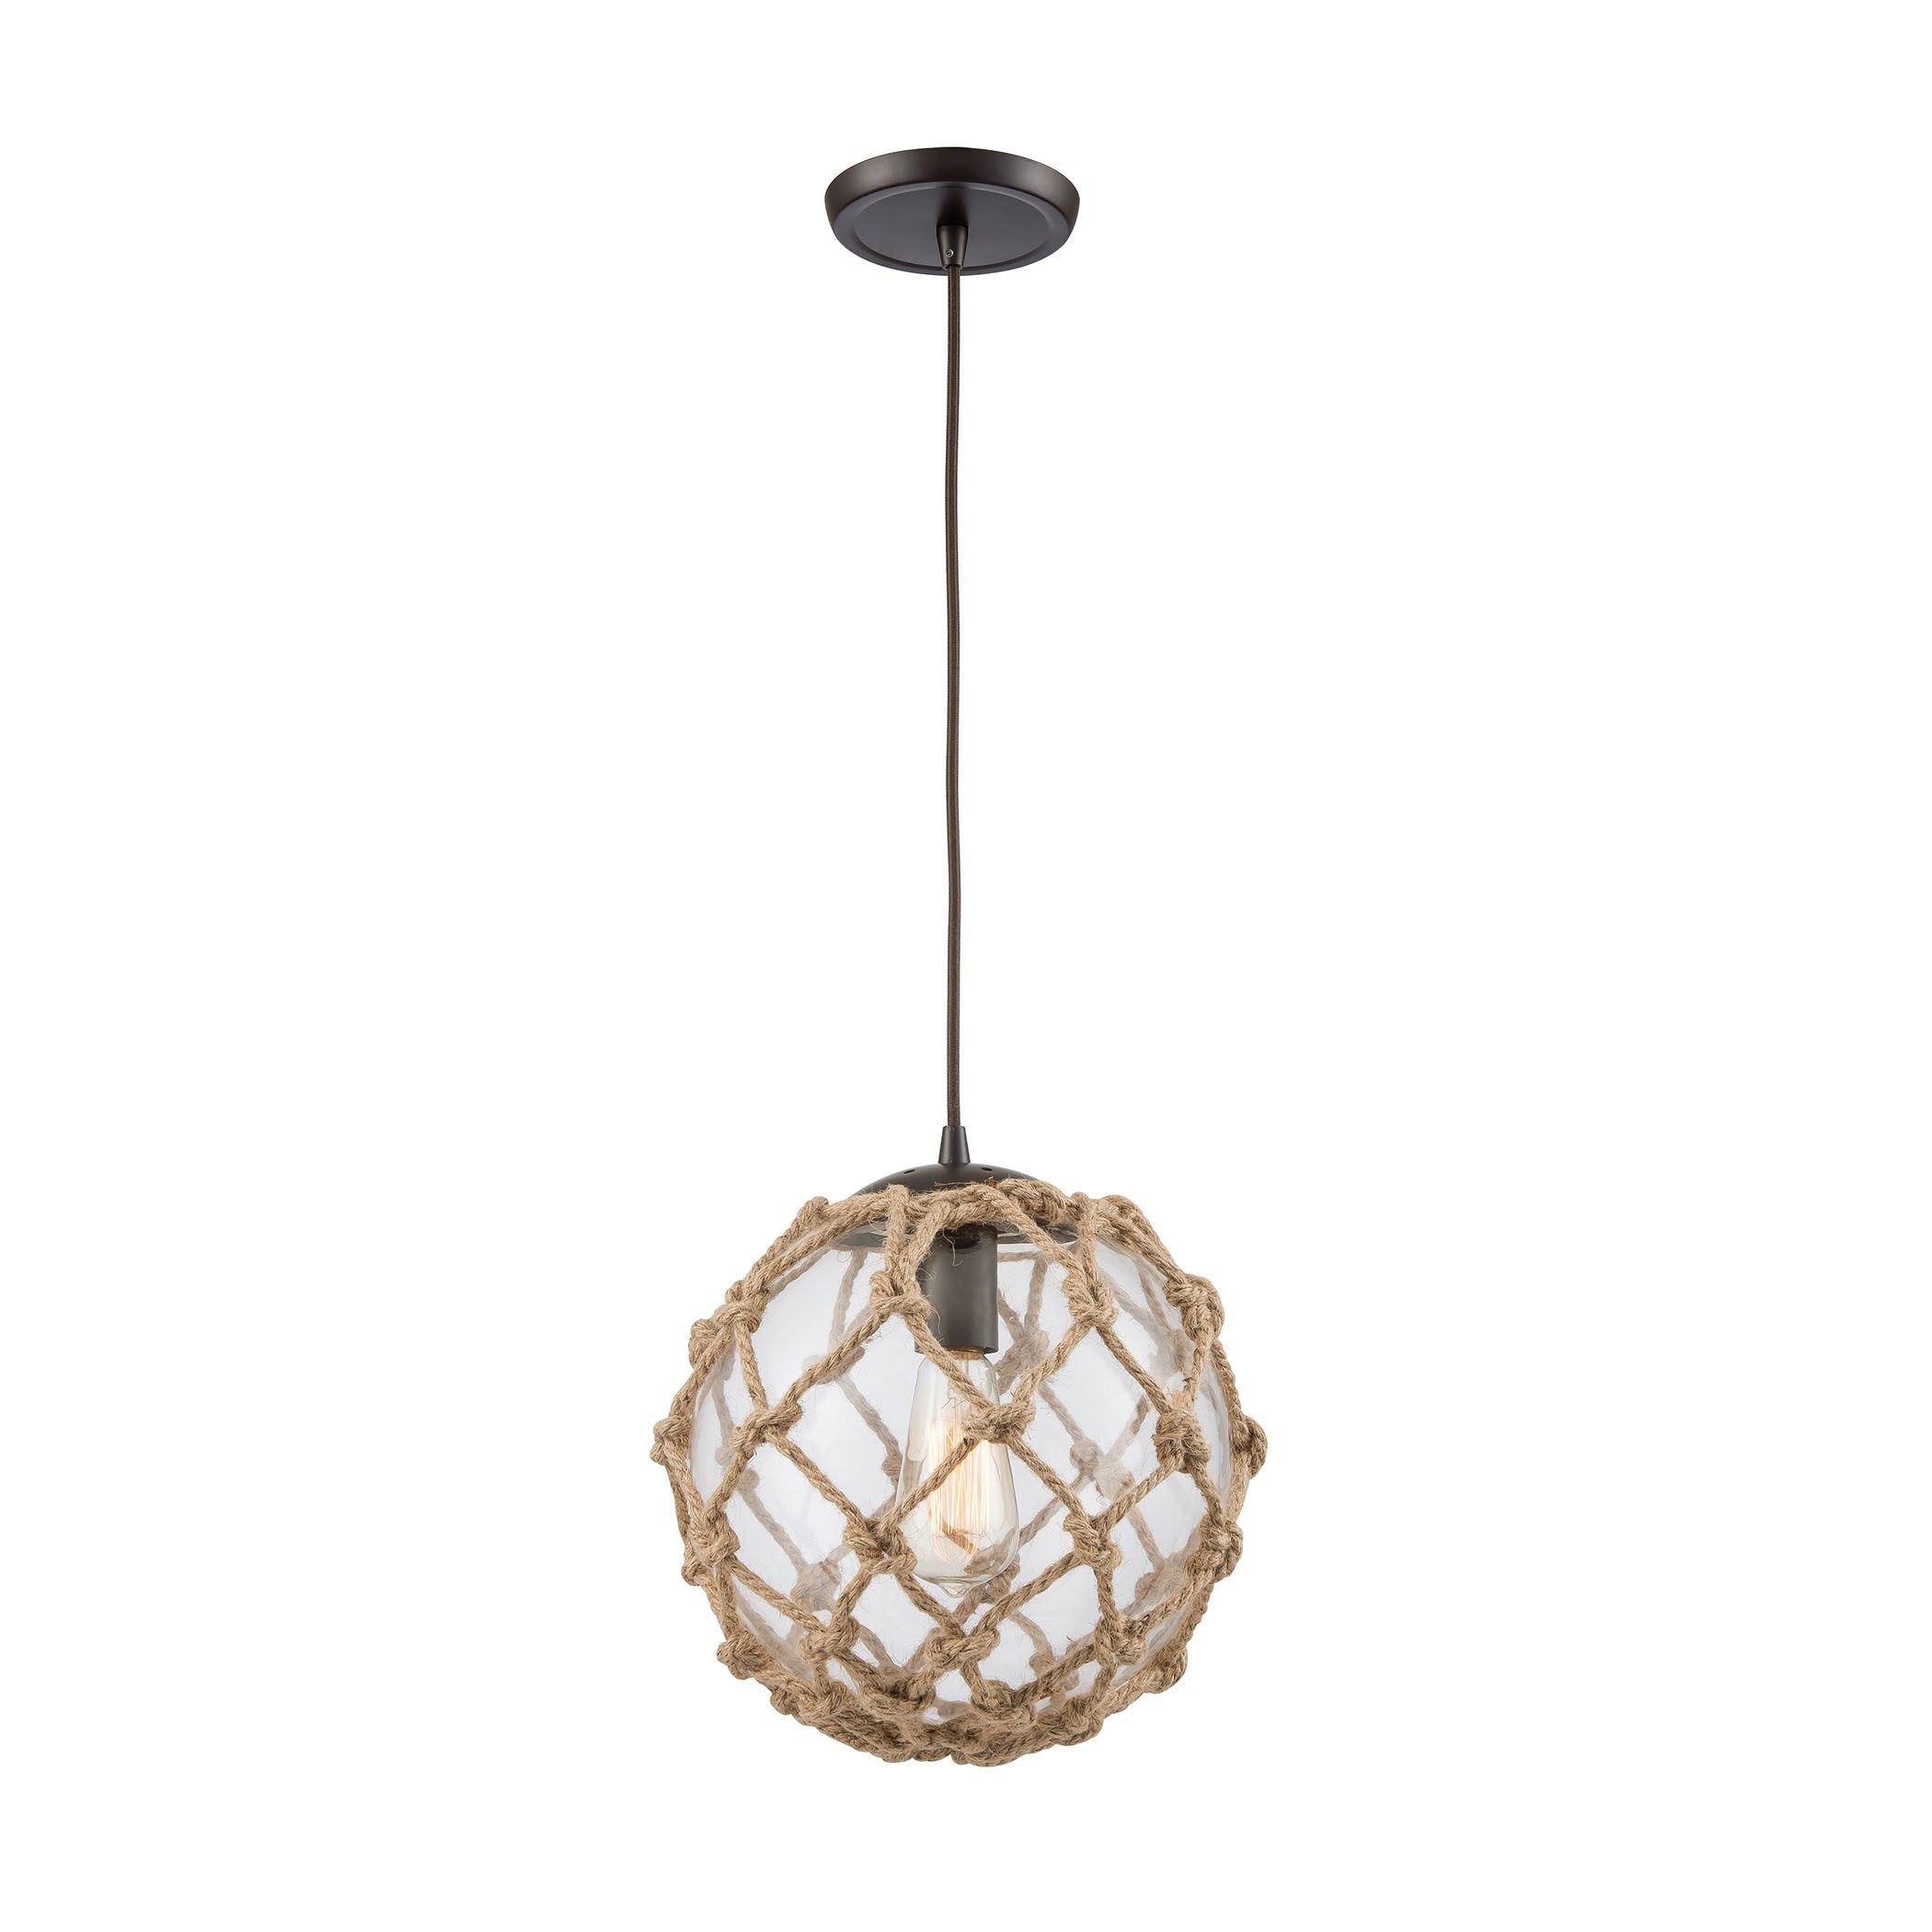 Coastal Inlet 1 Light Pendant, Oil Rubbed Bronze | Products Inside Poynter 1 Light Single Cylinder Pendants (View 10 of 30)